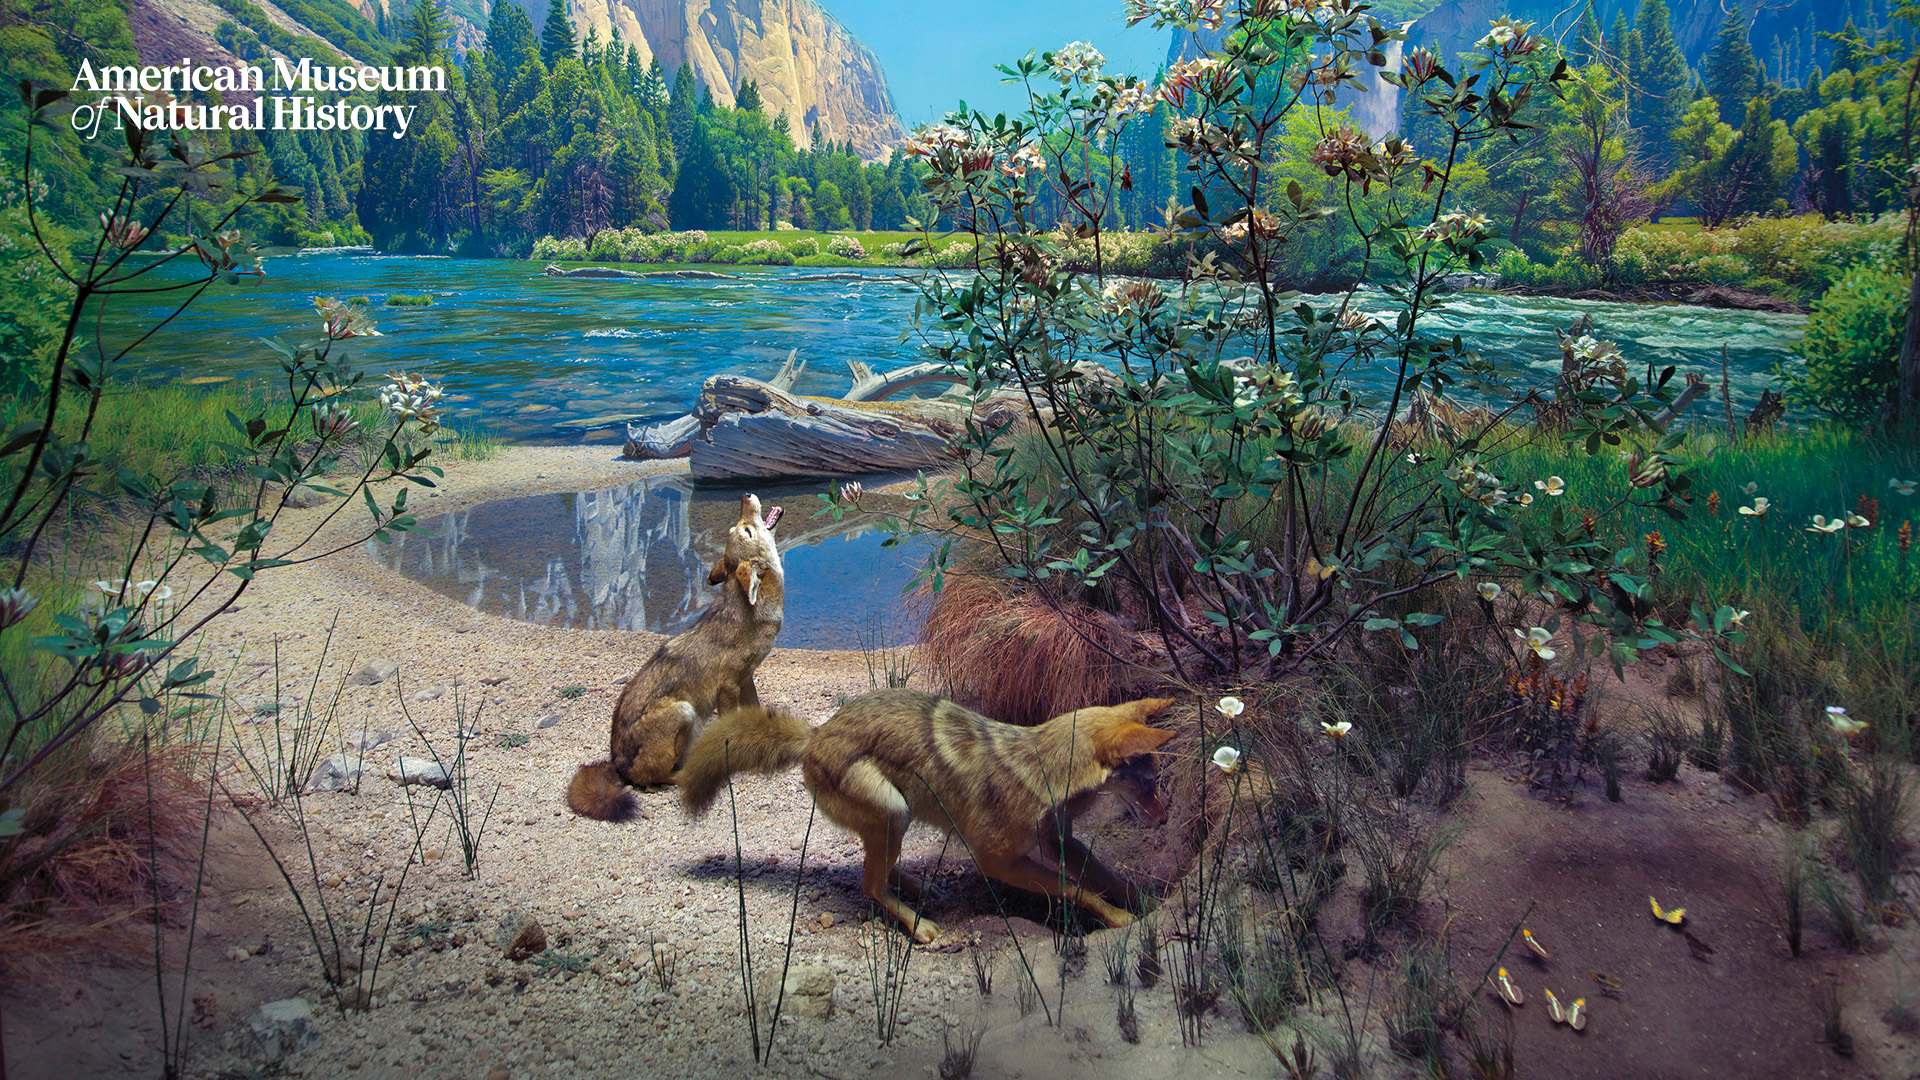 Digital Backgrounds for Meetings: Dinosaurs and Dioramas | AMNH